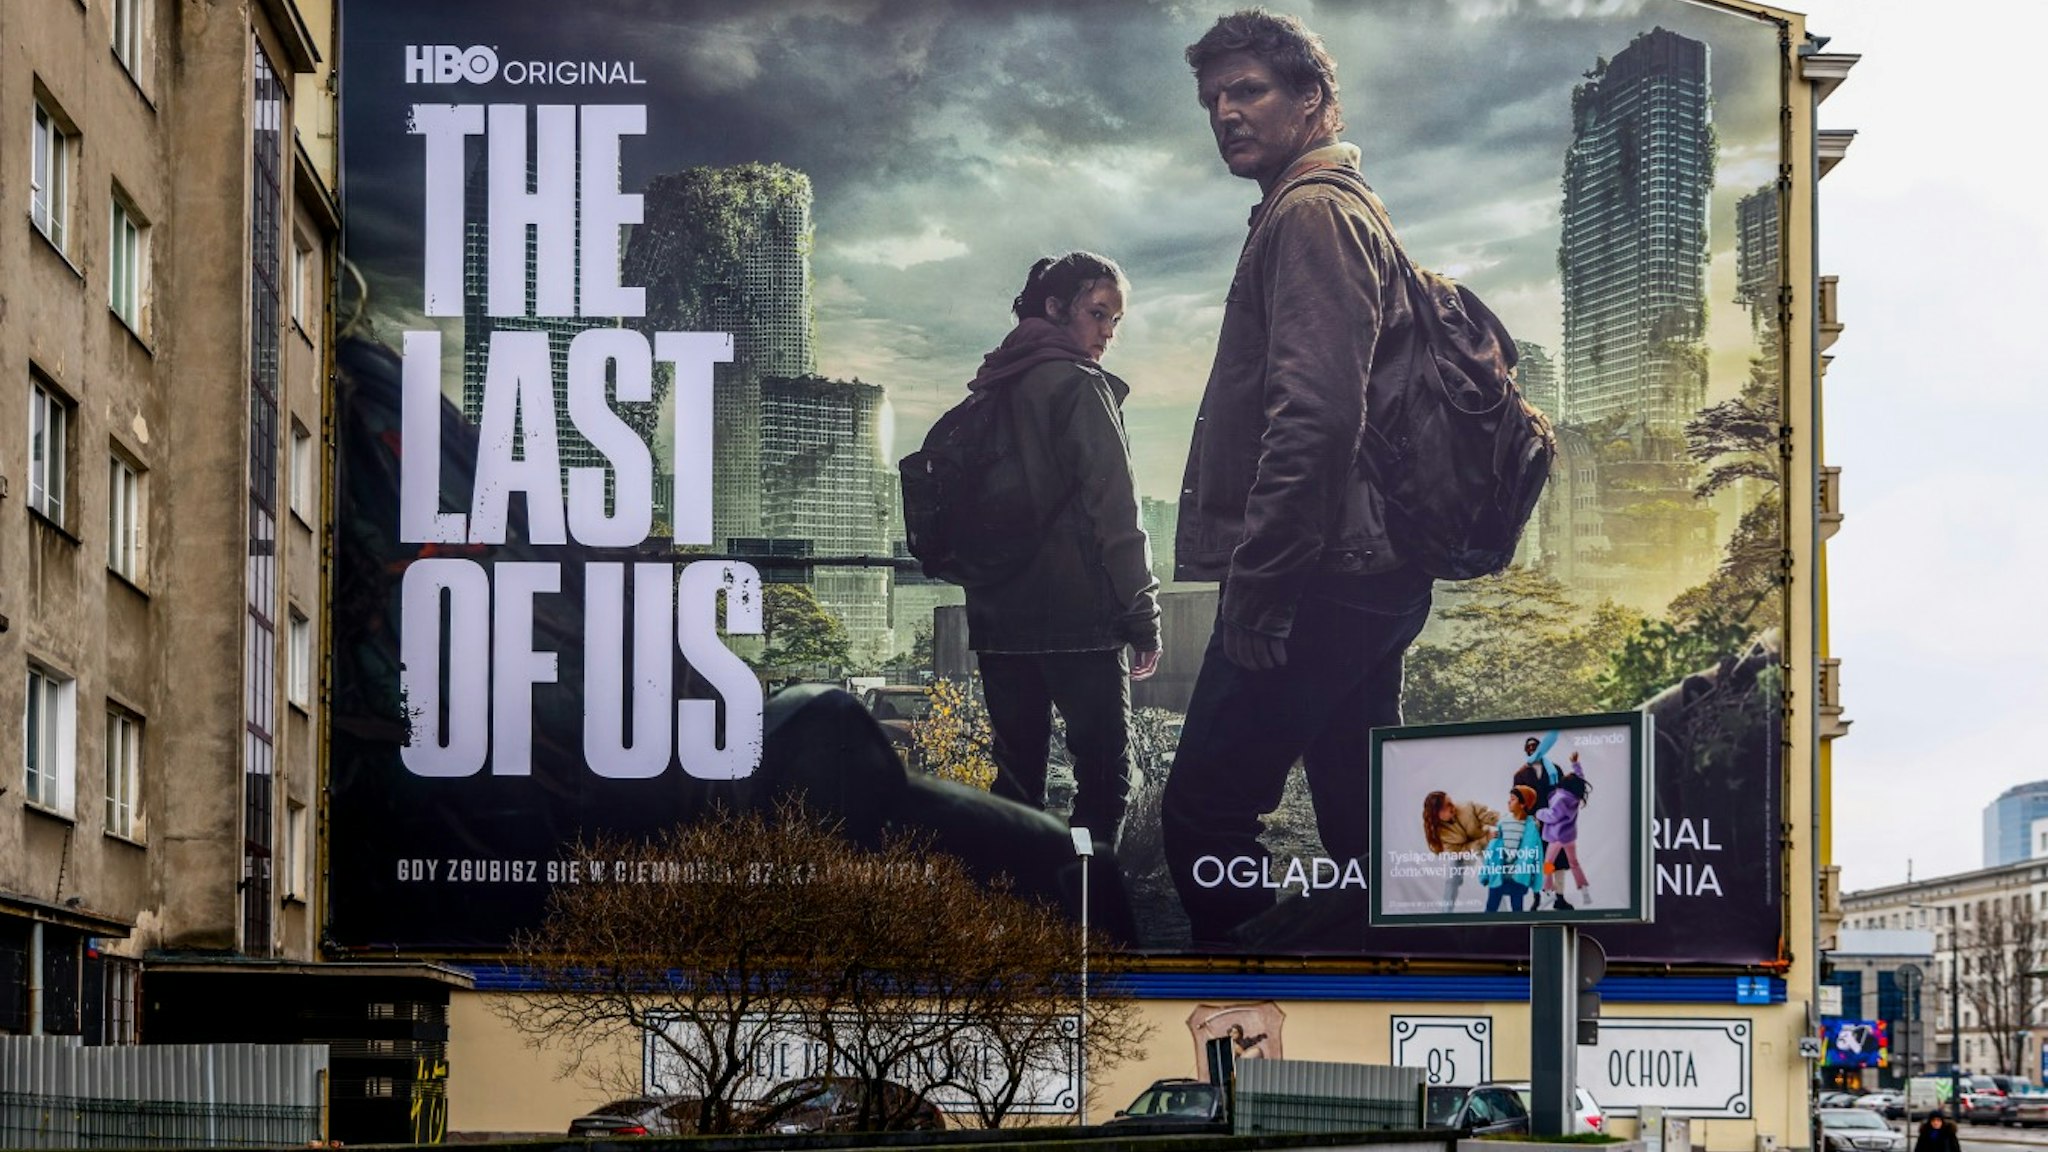 HBO's 'The Last of Us' TV series huge advertising banner is seen in the city center in Warsaw, Poland on January 19, 2023.